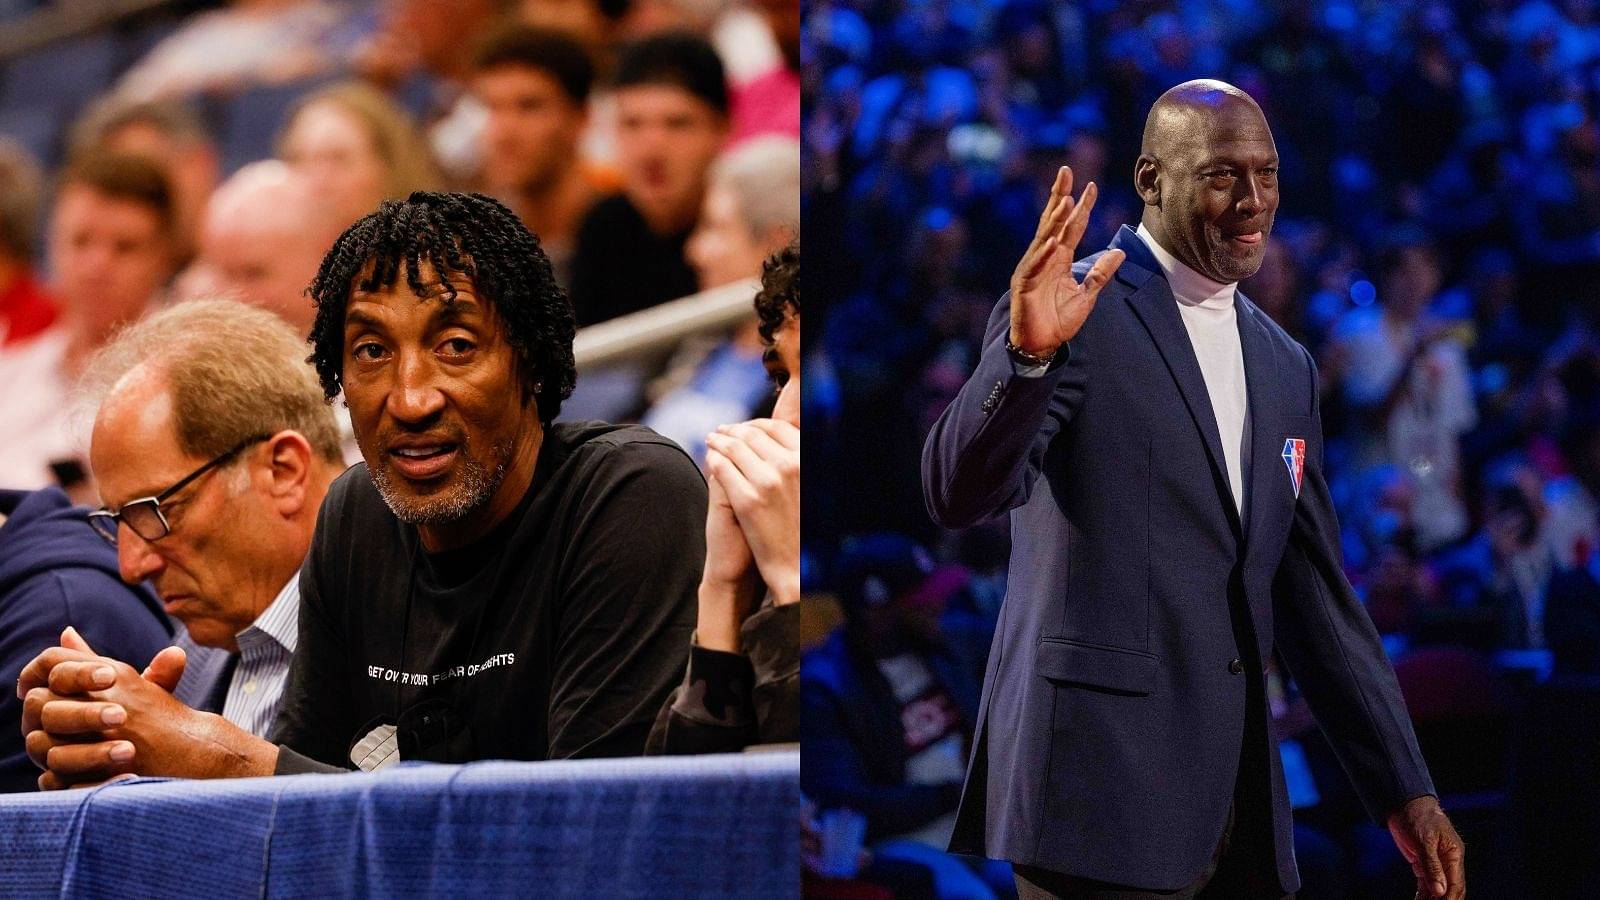 "They were too busy watching Michael Jordan": Scottie Pippen claims media's sole fixation on MJ robbed him of DPOY